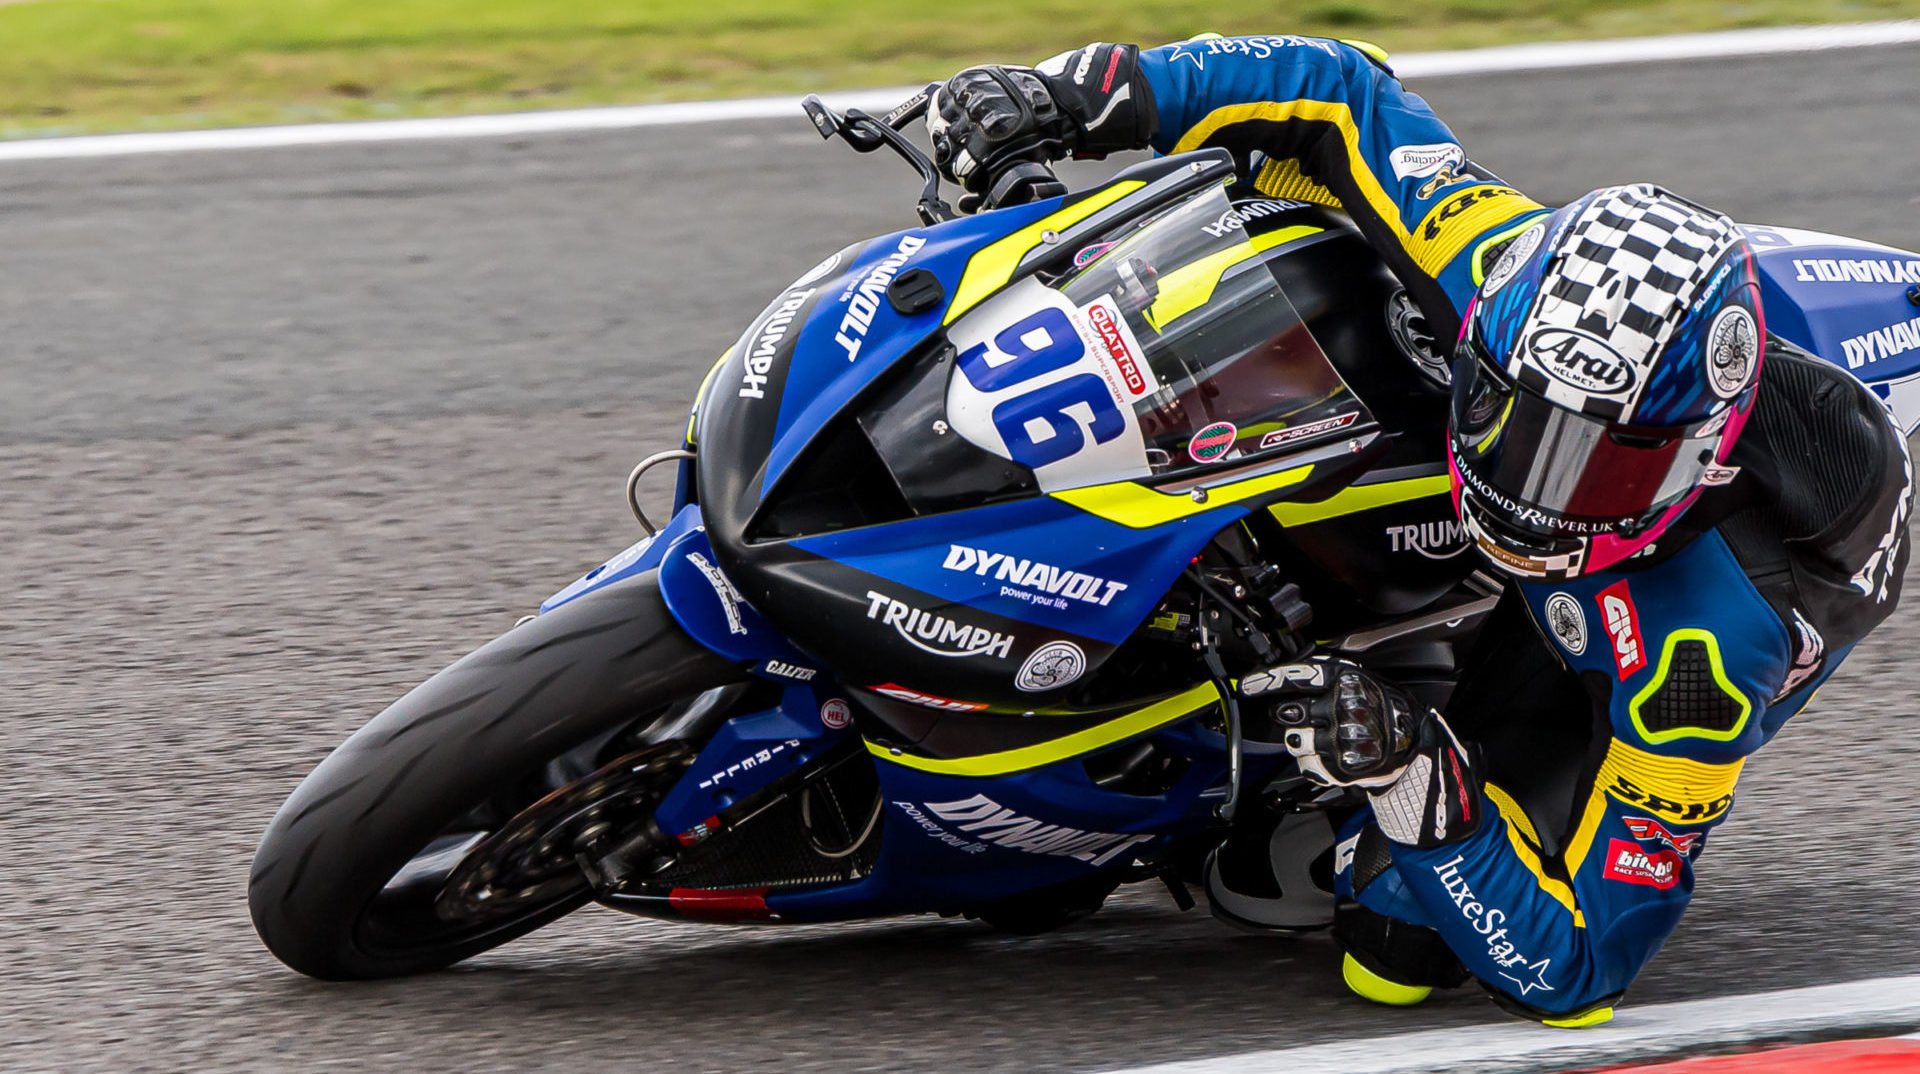 American Brandon Paasch (96) in action at Oulton Park. Photo by Barry Clay.